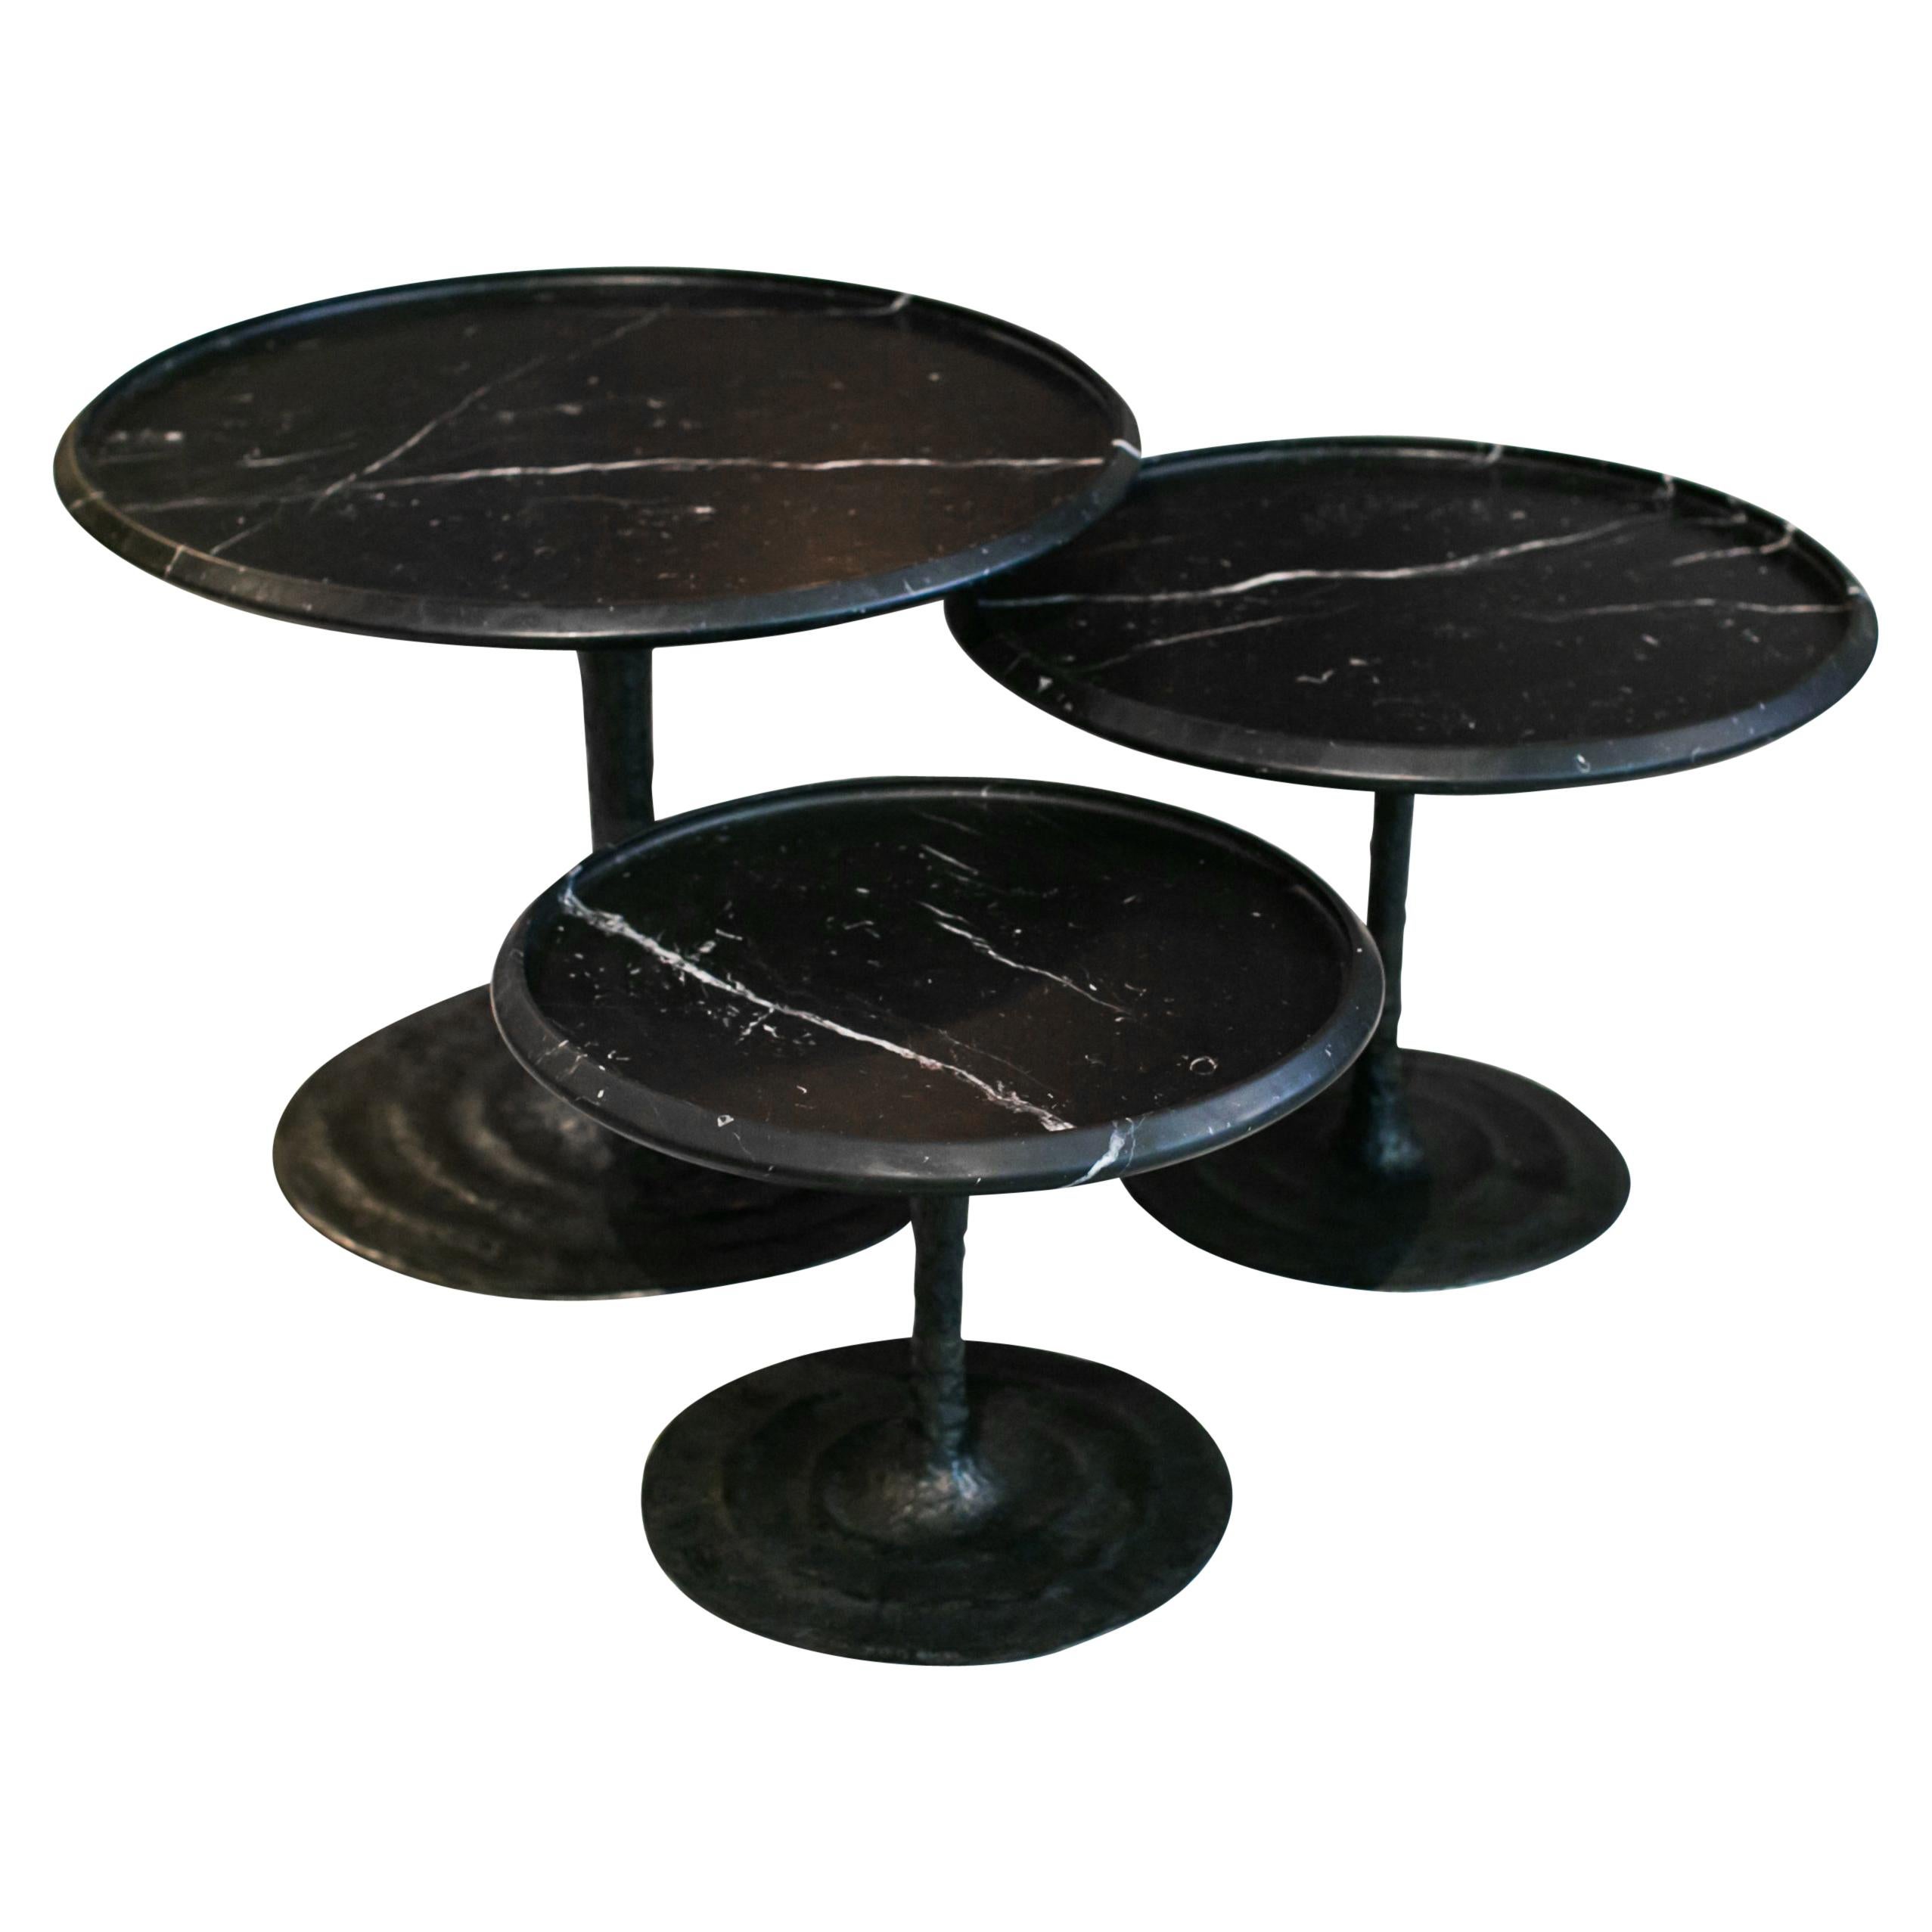 Edition signed, the Giverny tables are a series of nesting coffee tables inspired by the ne´nuphars (waterlilies) of Monet's house in Giverny. The movement carved at the bronze foot evoke the water movement. Their elegant silhouettes and detailed